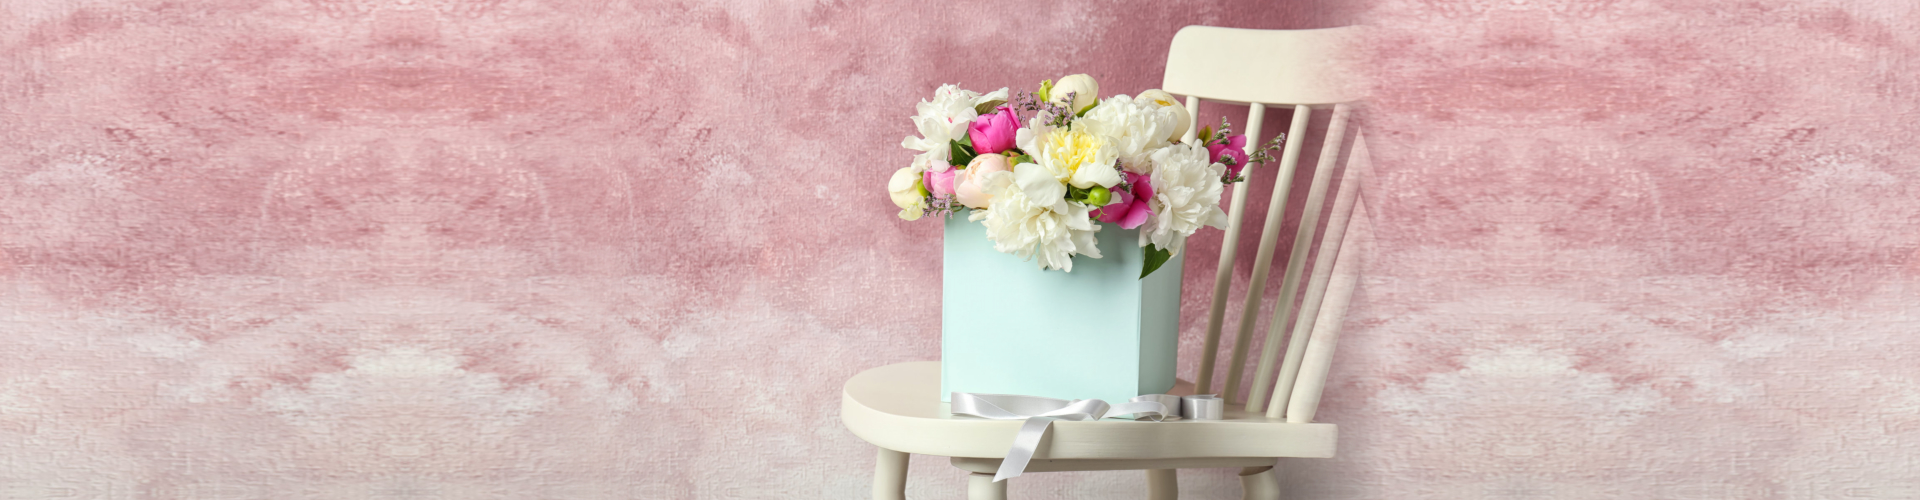 Box with beautiful flowers on wooden chair against color background